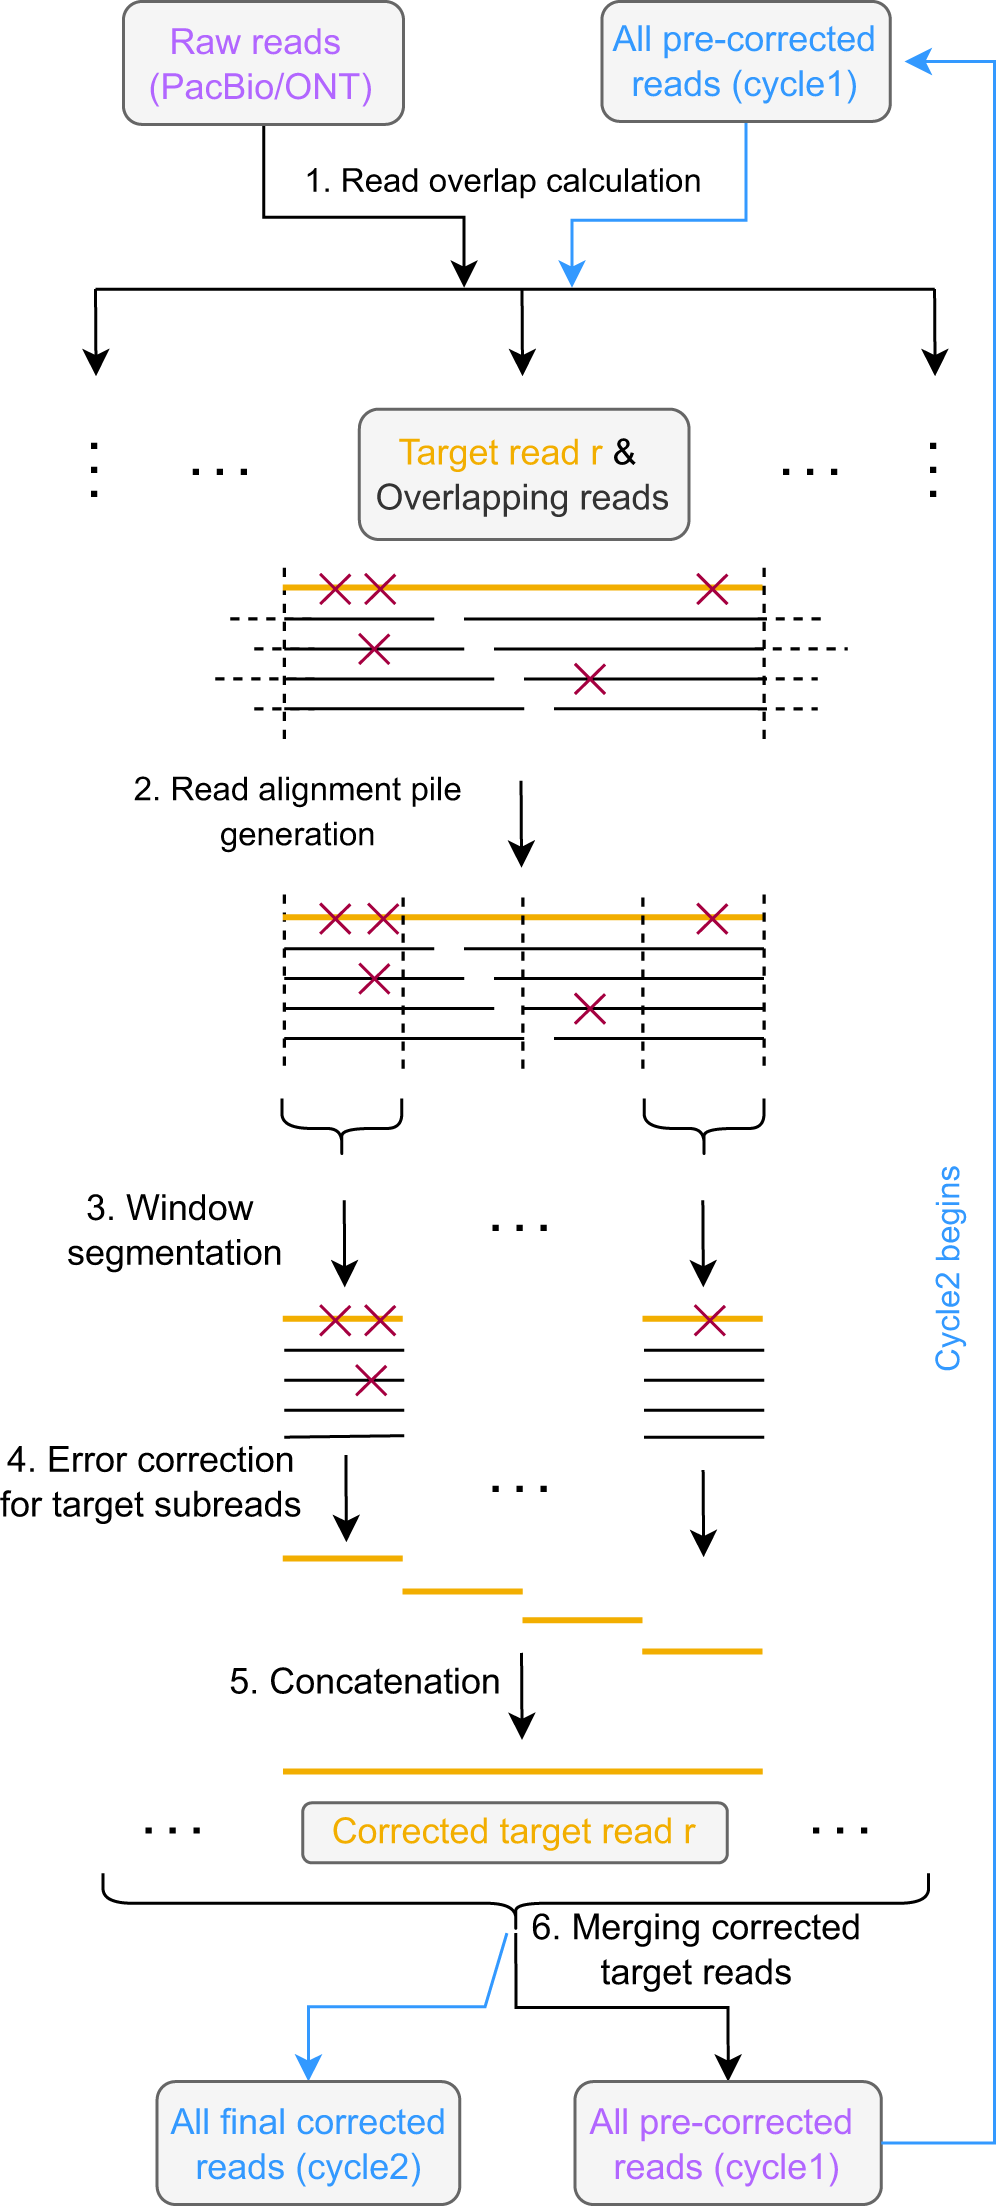 DREAMS: deep read-level error model for sequencing data applied to